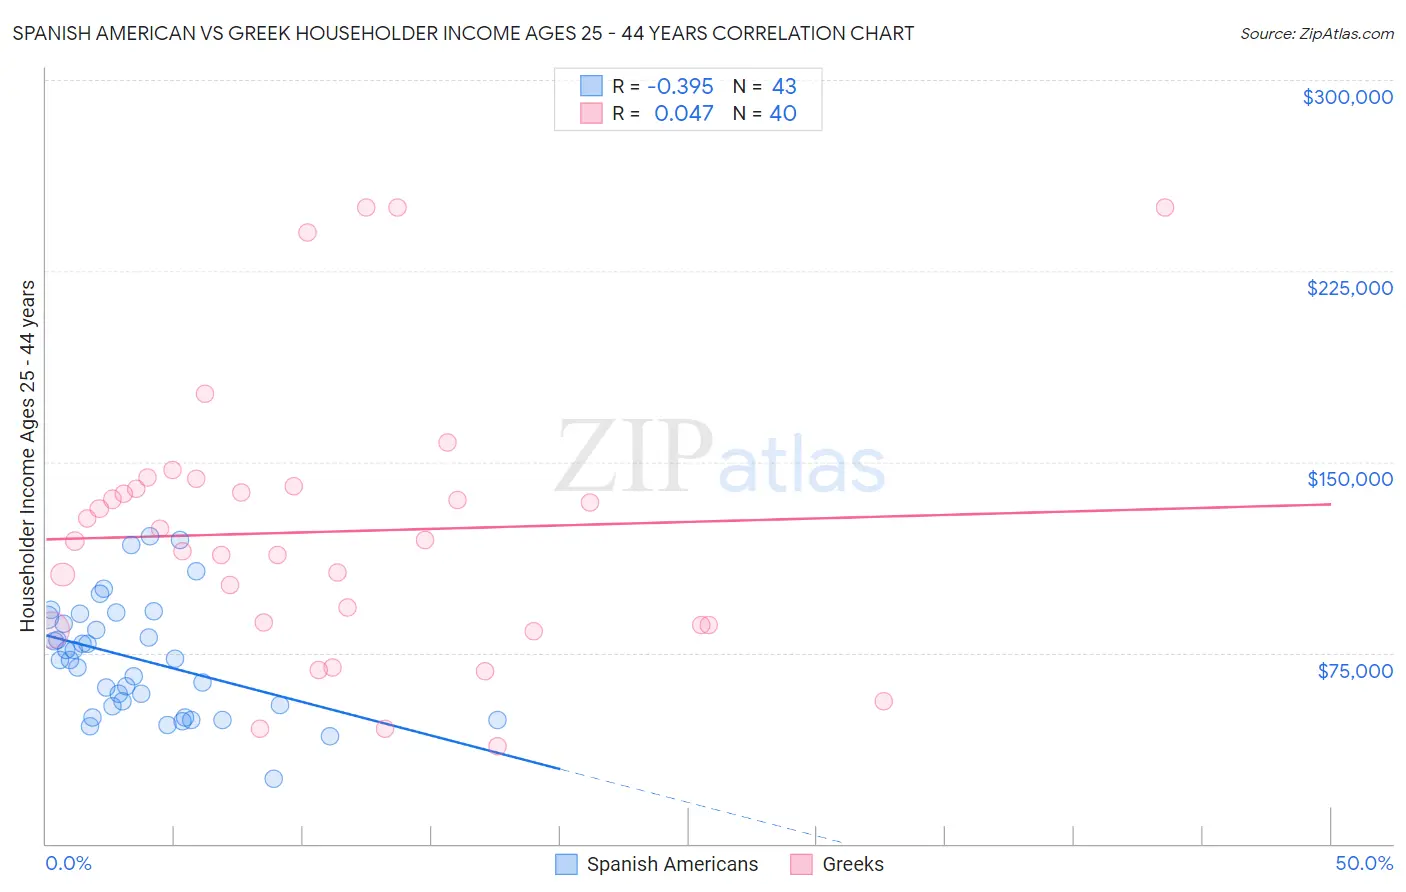 Spanish American vs Greek Householder Income Ages 25 - 44 years